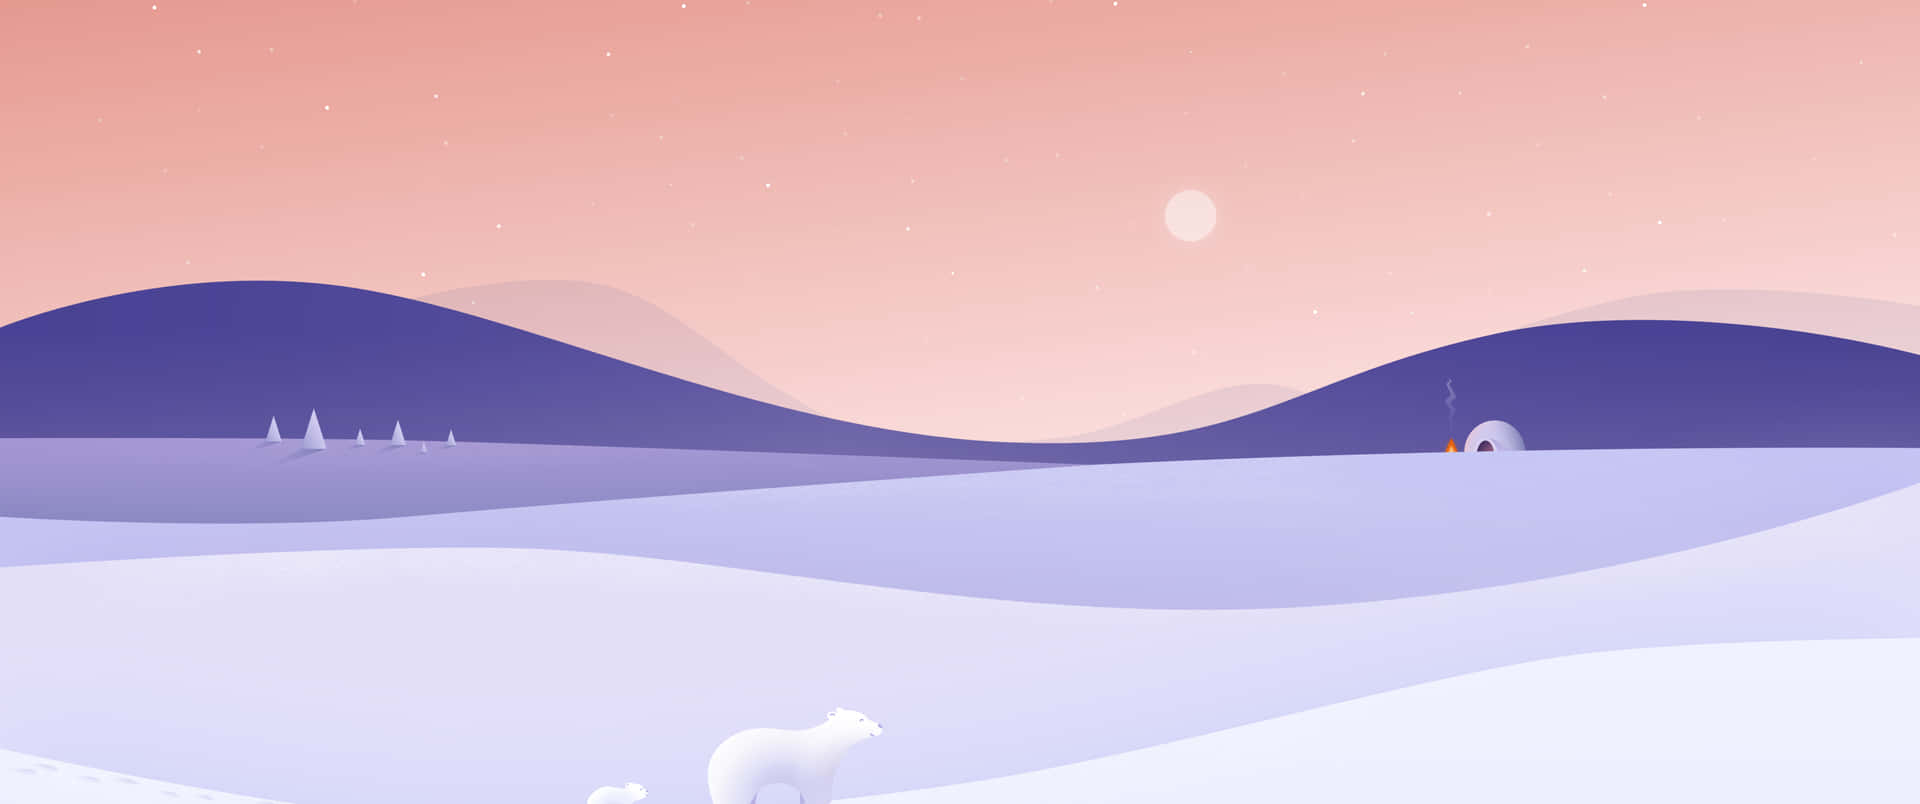 Beautiful Winter Landscape caps off a Cold Day Wallpaper